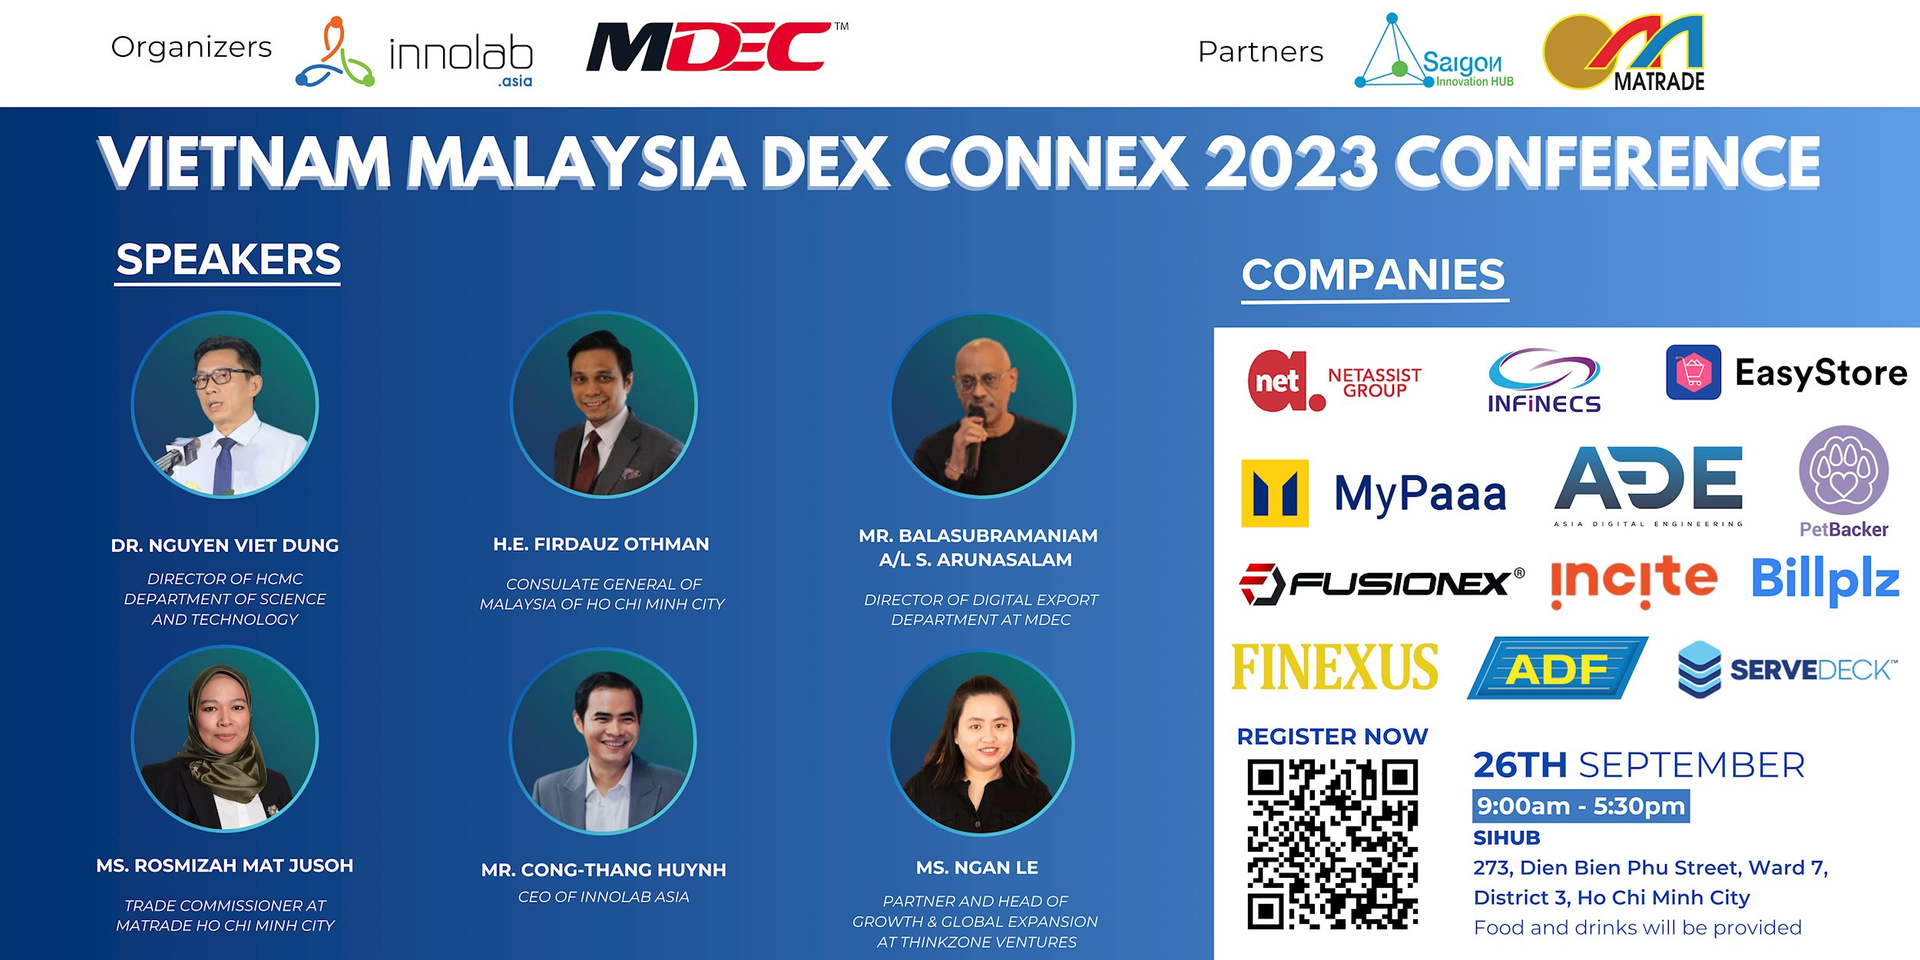 vietnam-malaysia-dex-connex-2023-conference-2160-x-1080-.png